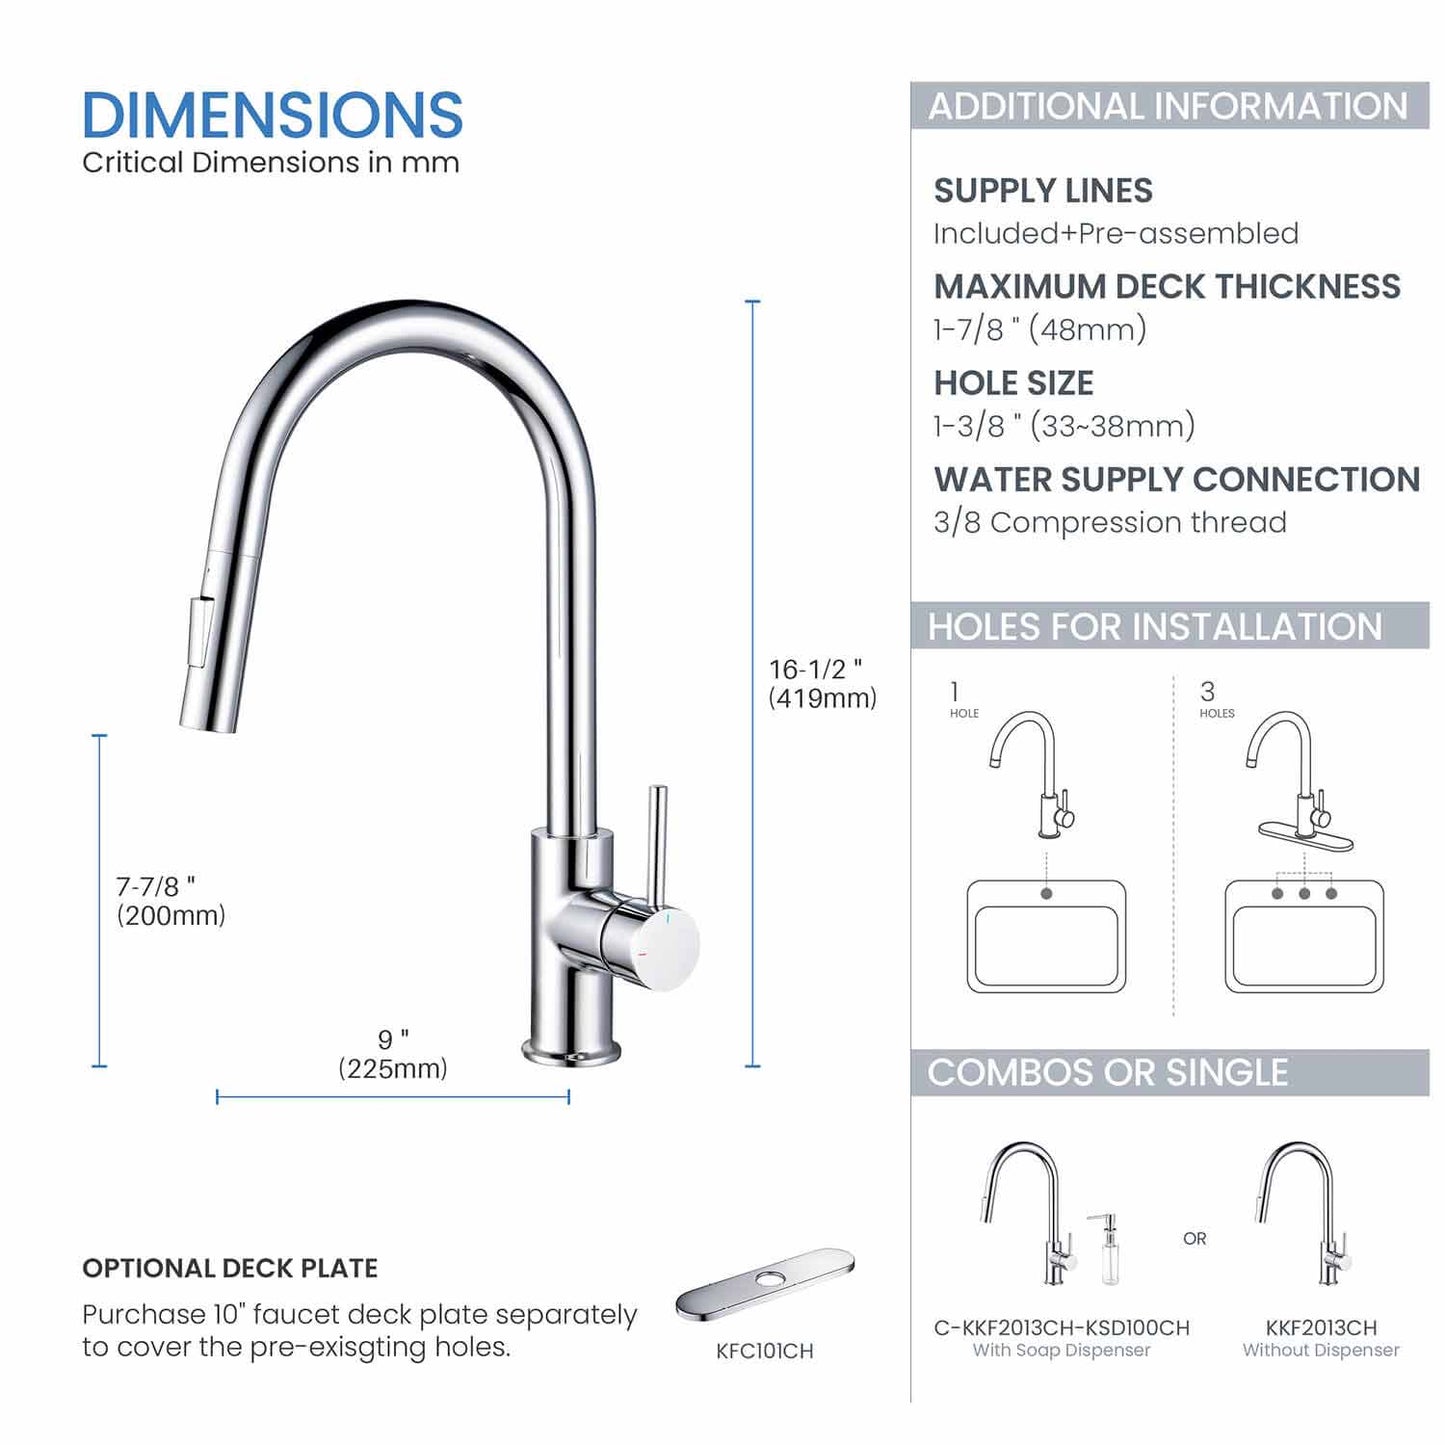 Kibi Circular Single Handle Pull Down Kitchen Faucet With Soap Dispenser in Chrome Finish